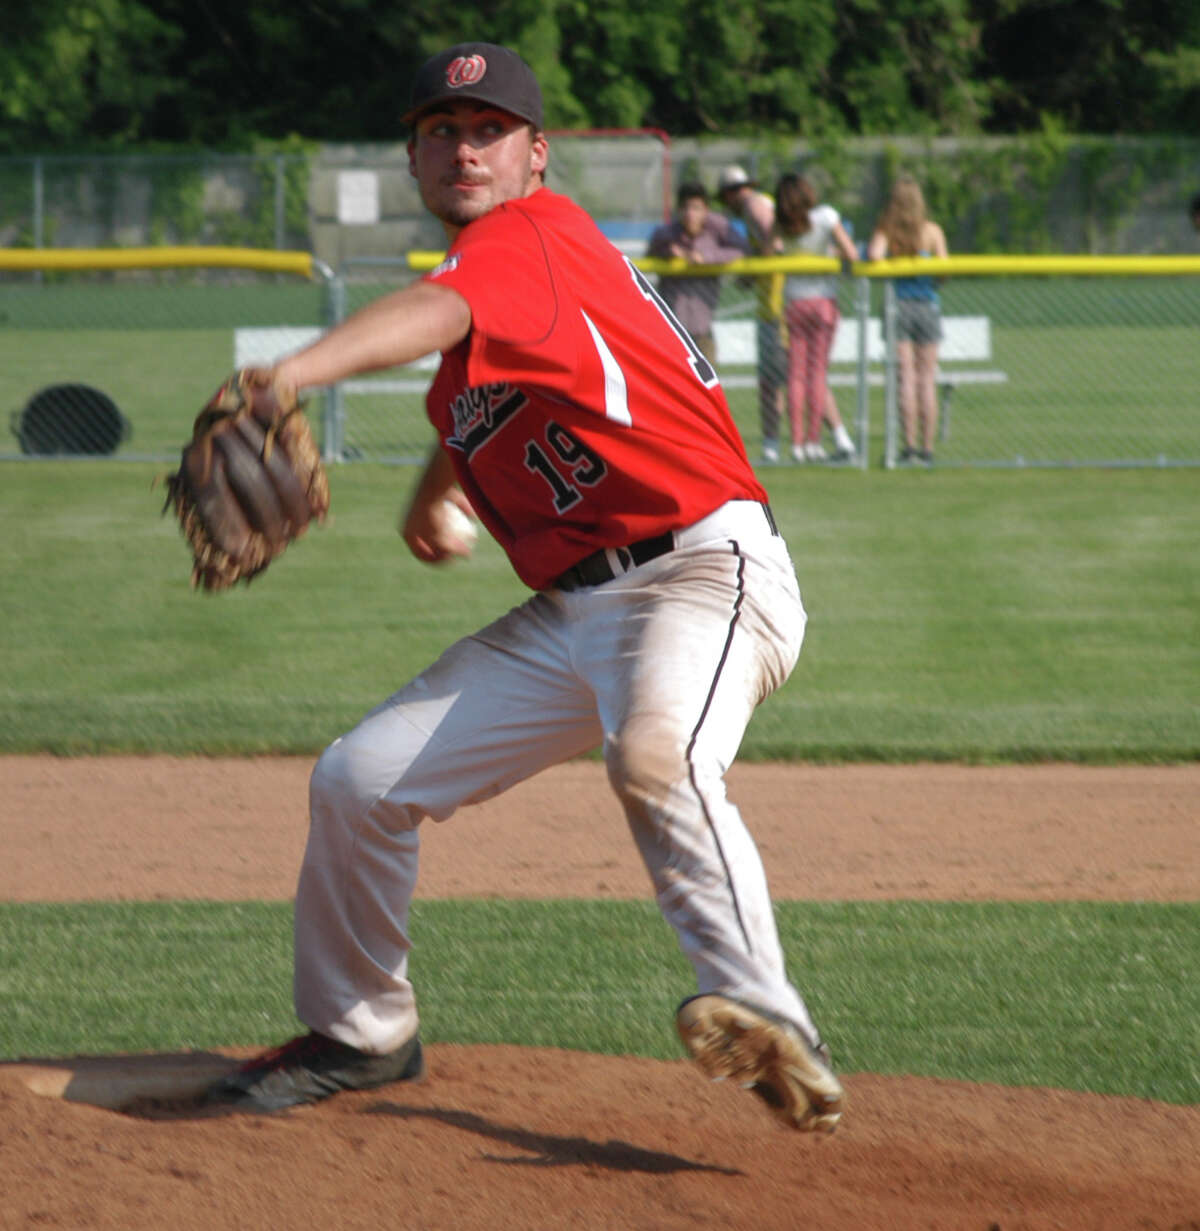 Fairfield Warde pitcher Nick Nardone on the mound against Staples in a CIAC Class LL baseball second-round game on Tuesday, June 3 in Westport. The Mustangs advanced to the quarterfinals by defeating the Wreckers.